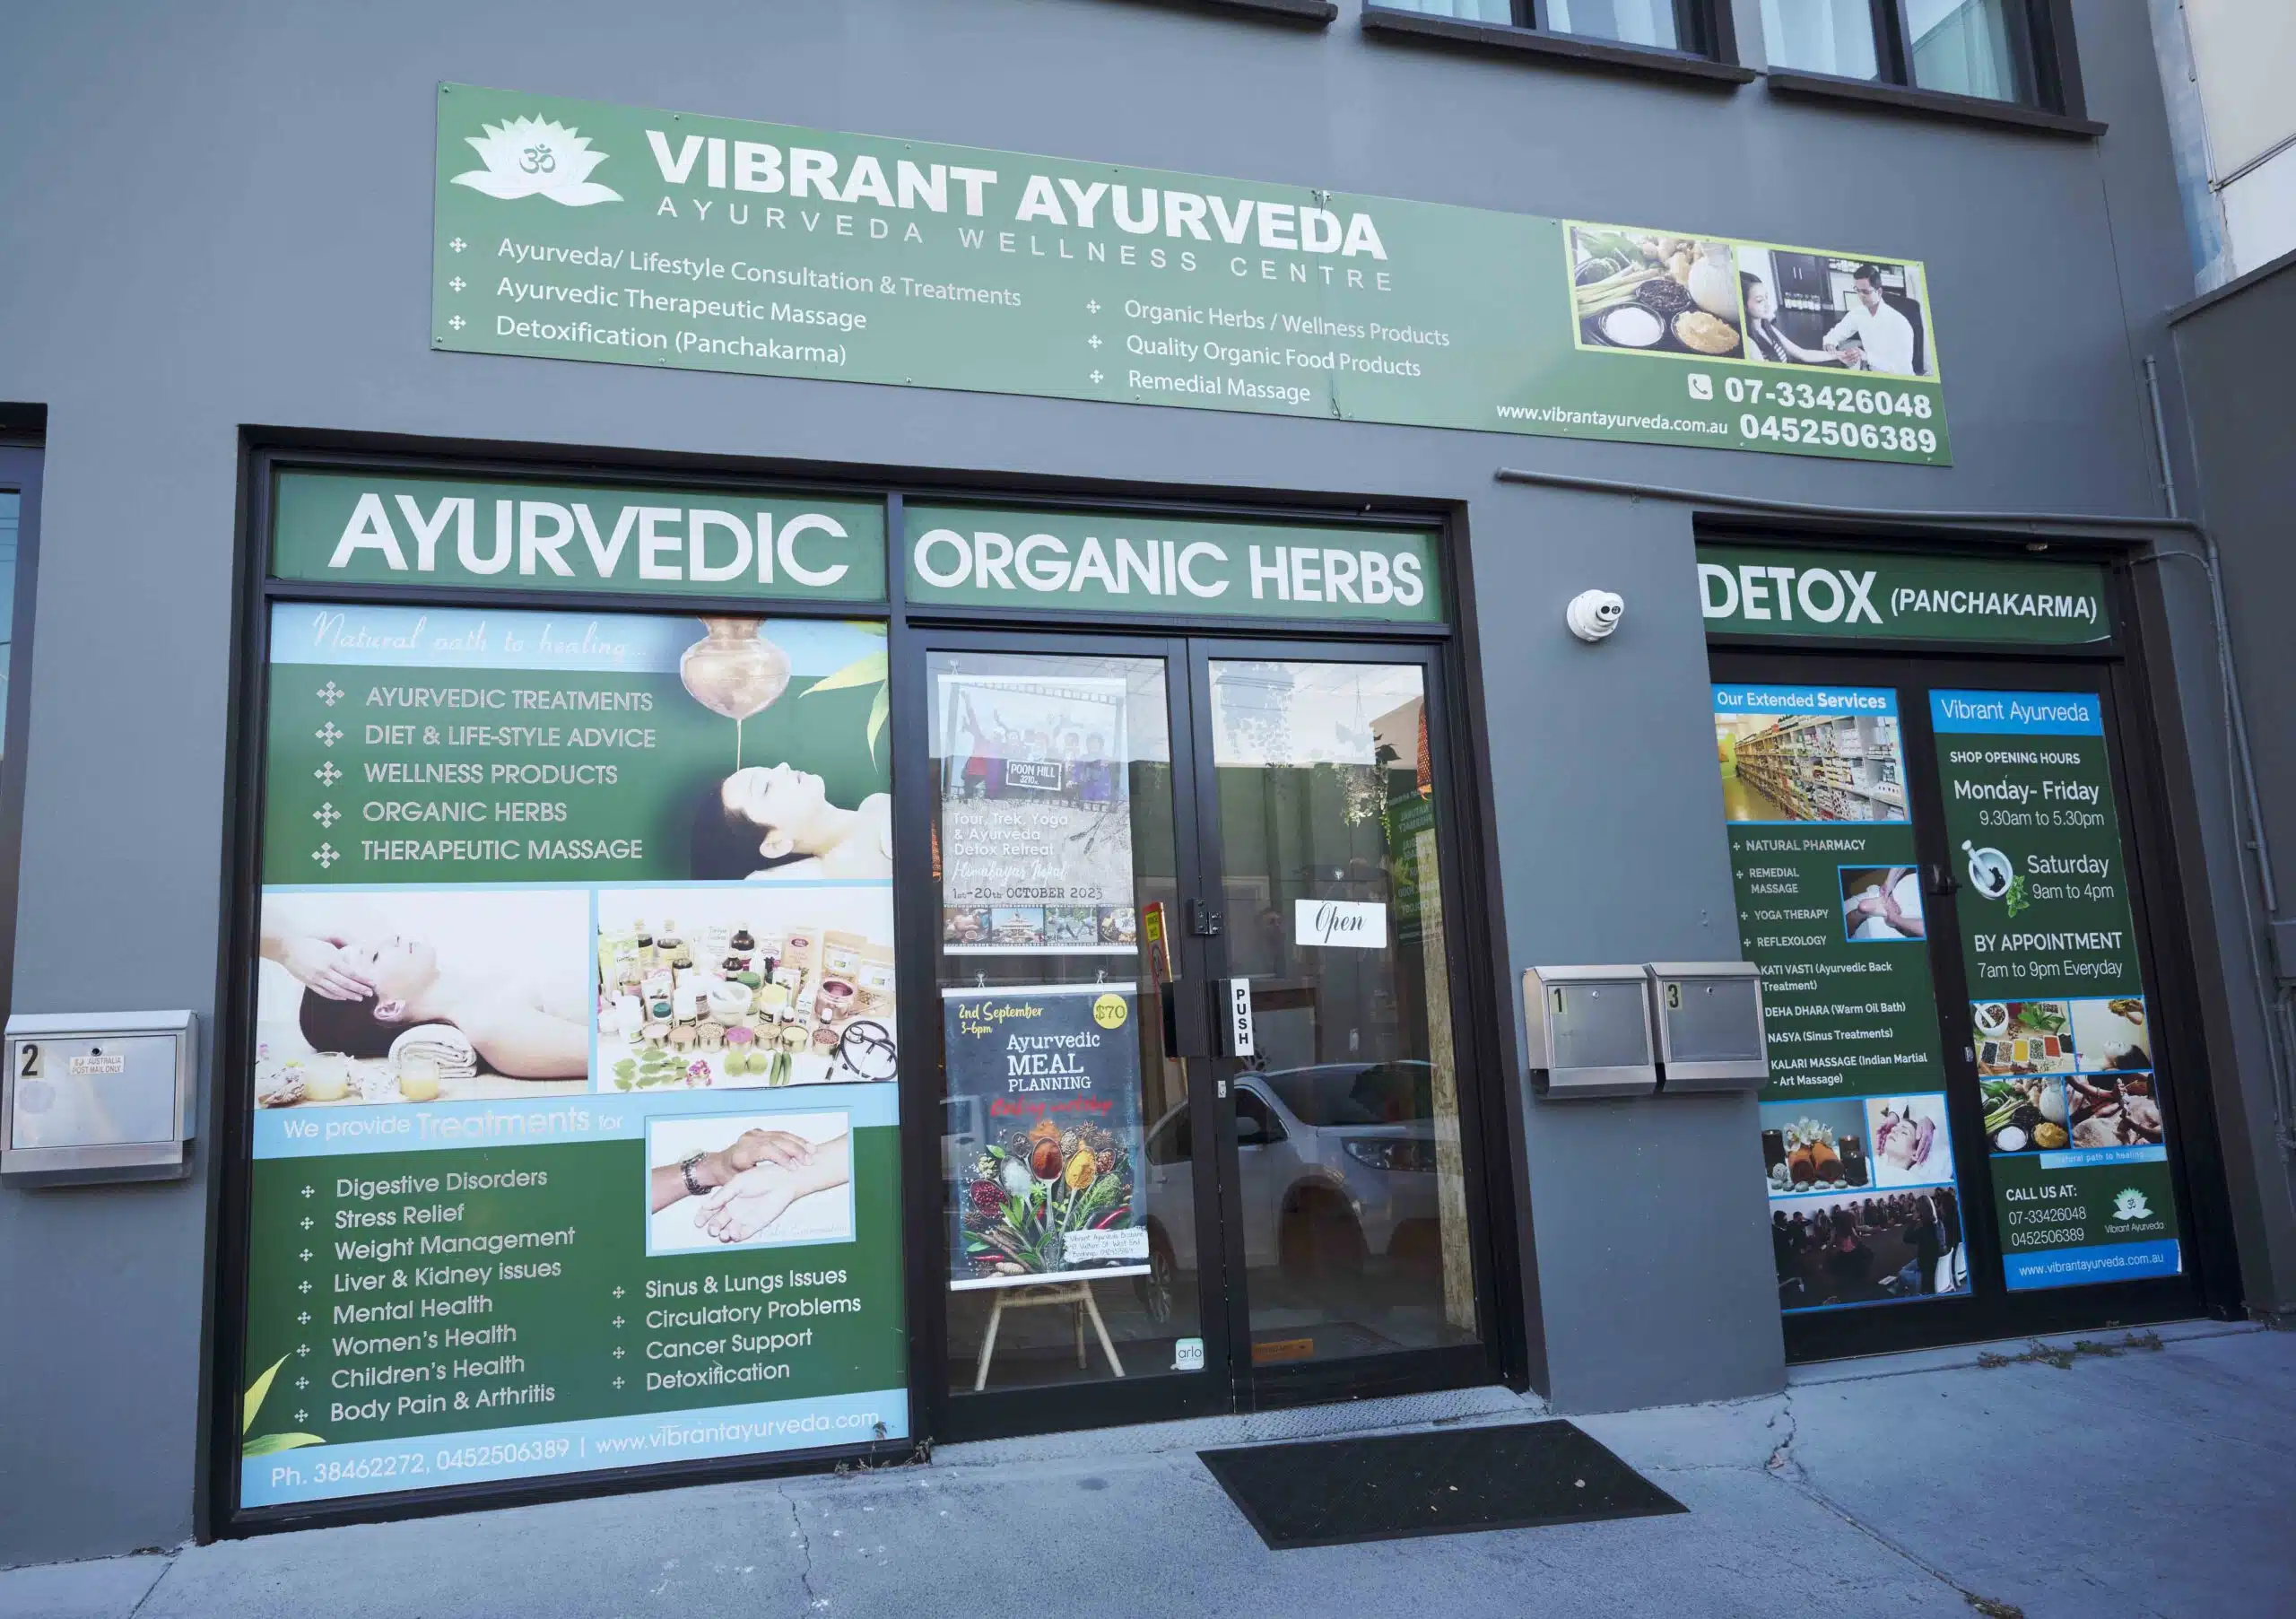 Ayurvedic Detox Centres in Nepal and India